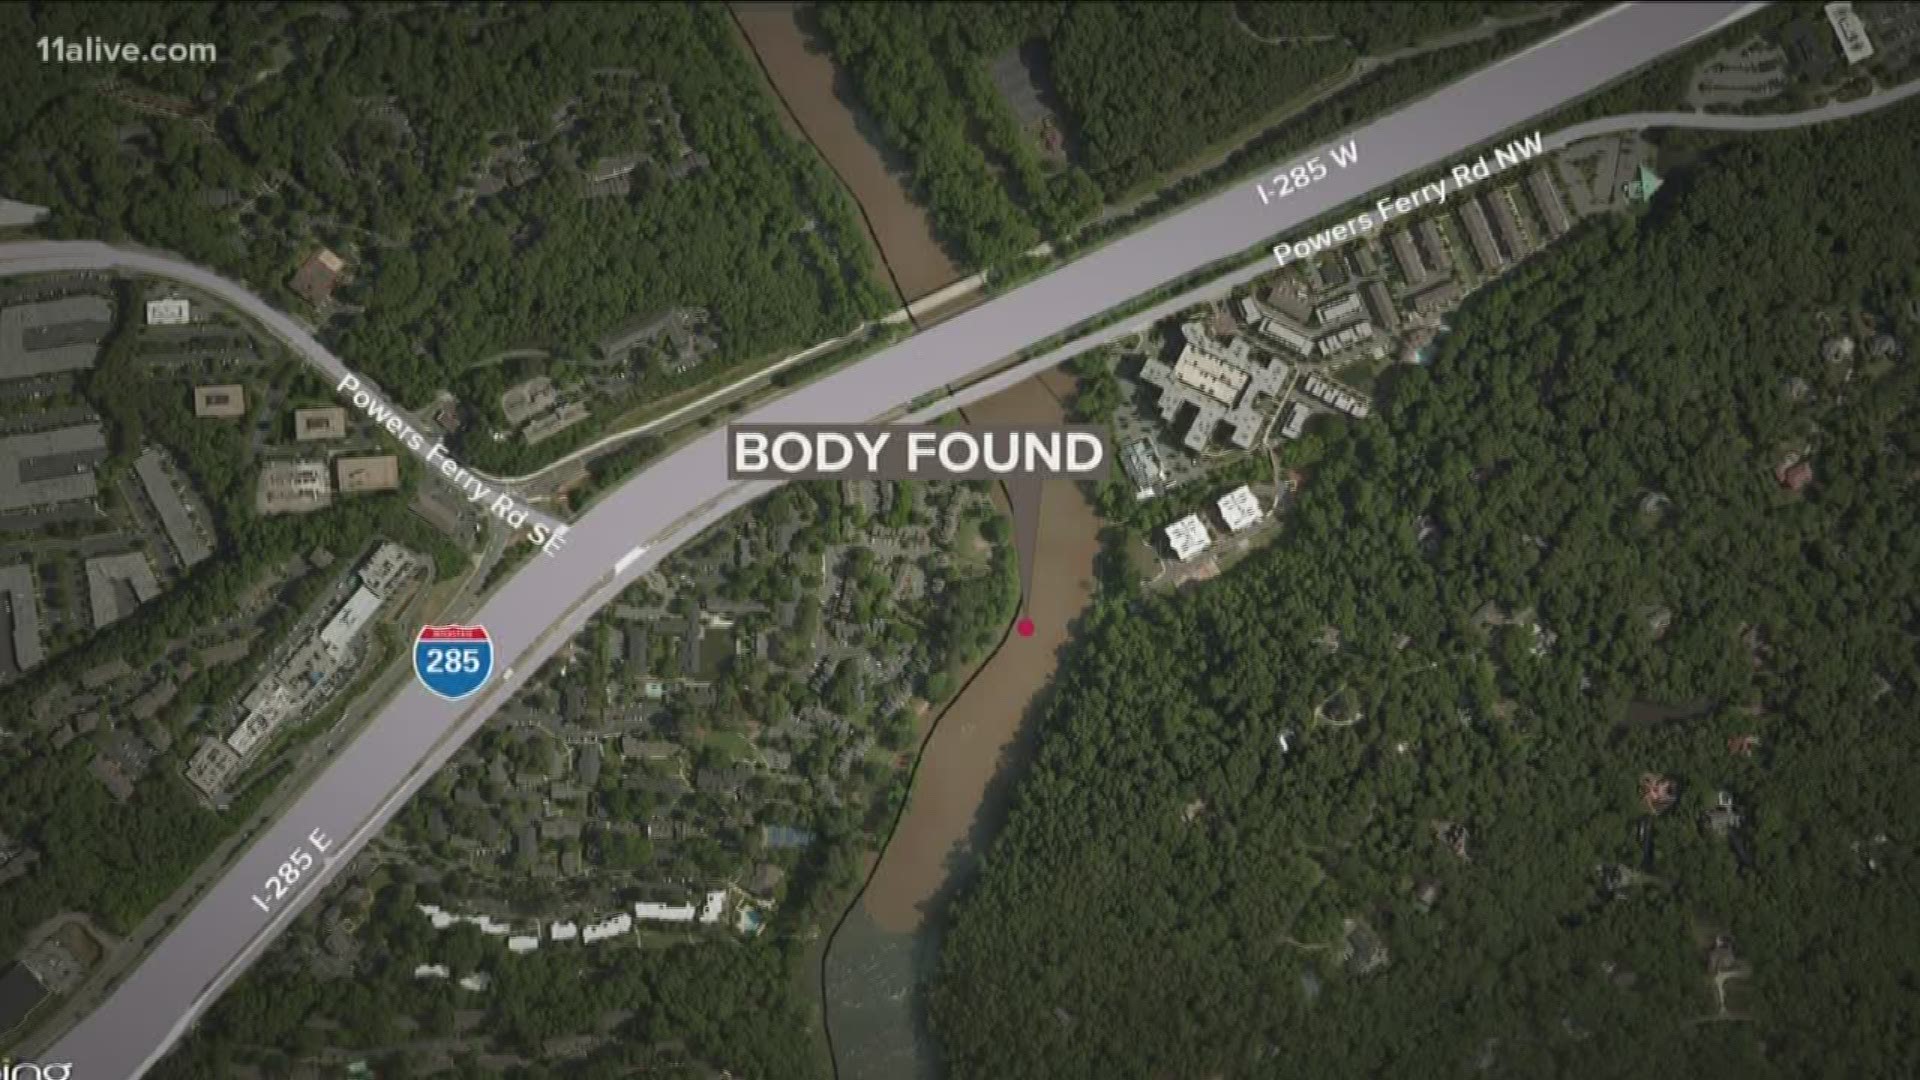 Authorities haven't provided many details about the discovery or who the person might be.